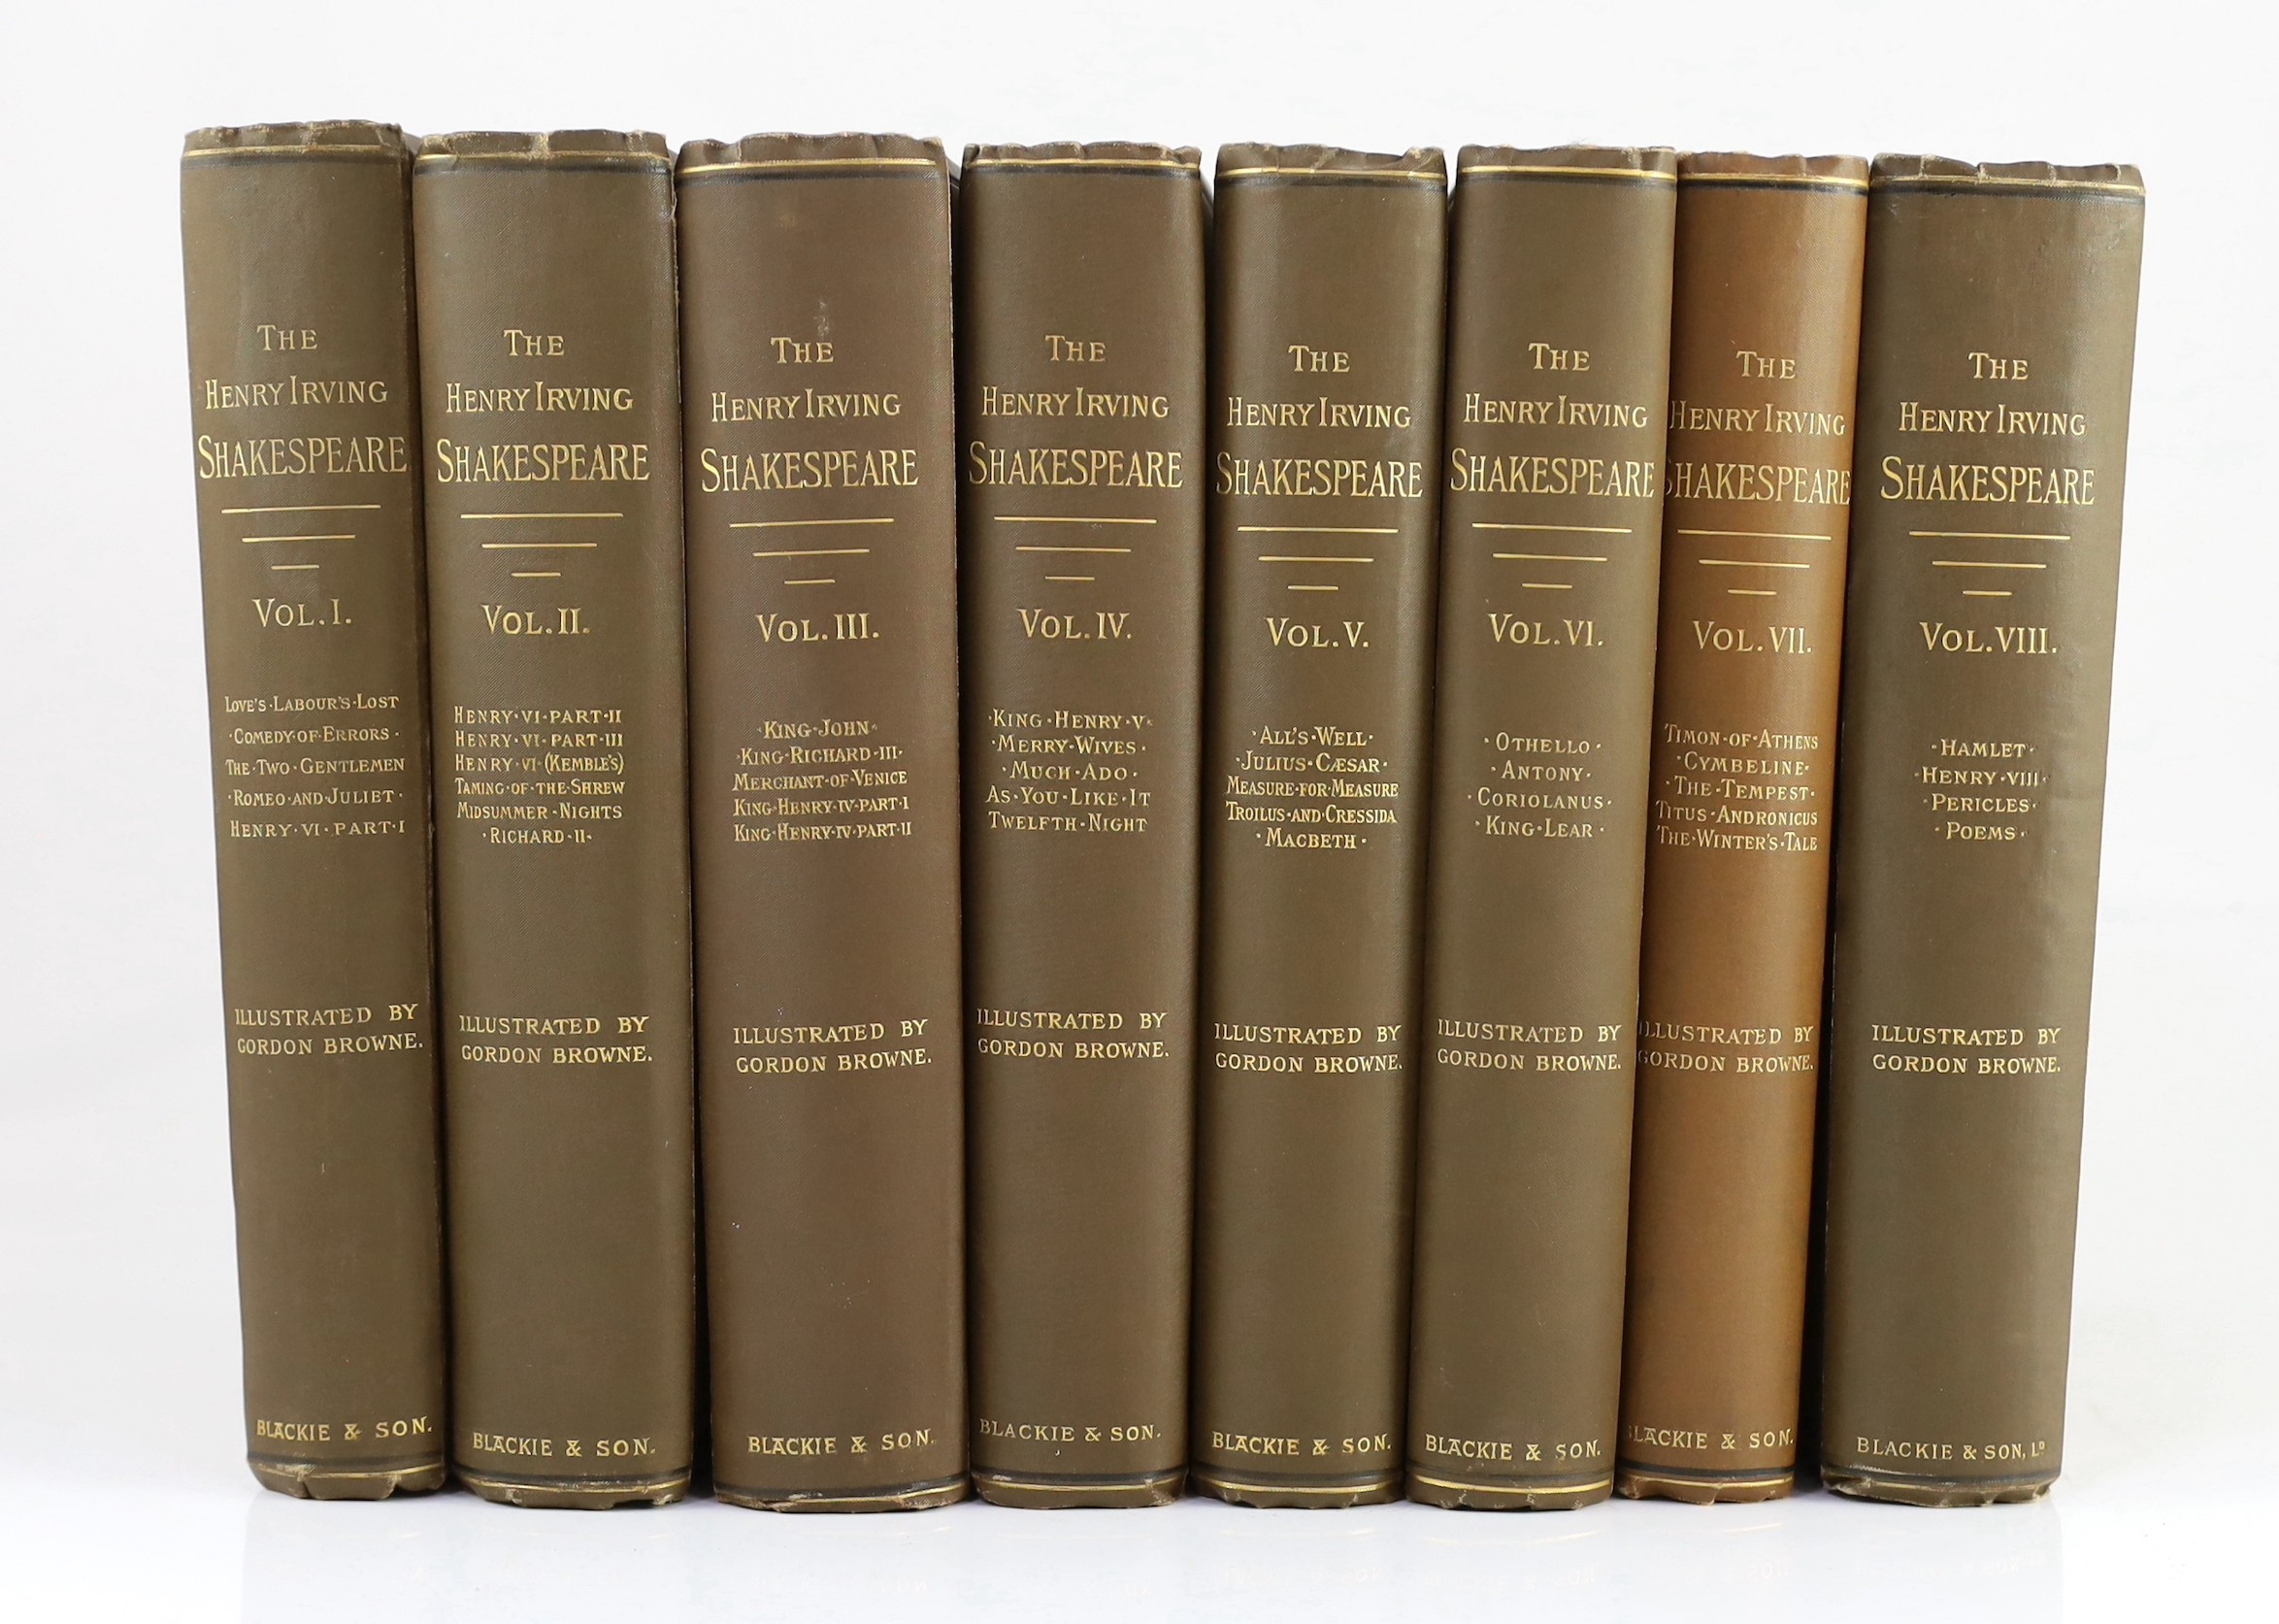 Shakespeare, William - The Works, edited by Henry Irving, illustrated by Gordon Browne, 8 vols, 8vo, gilt stamped cloth, (cloth to vol. 7 a lighter shade, as usual), Blackie and Son, London, 1888-90